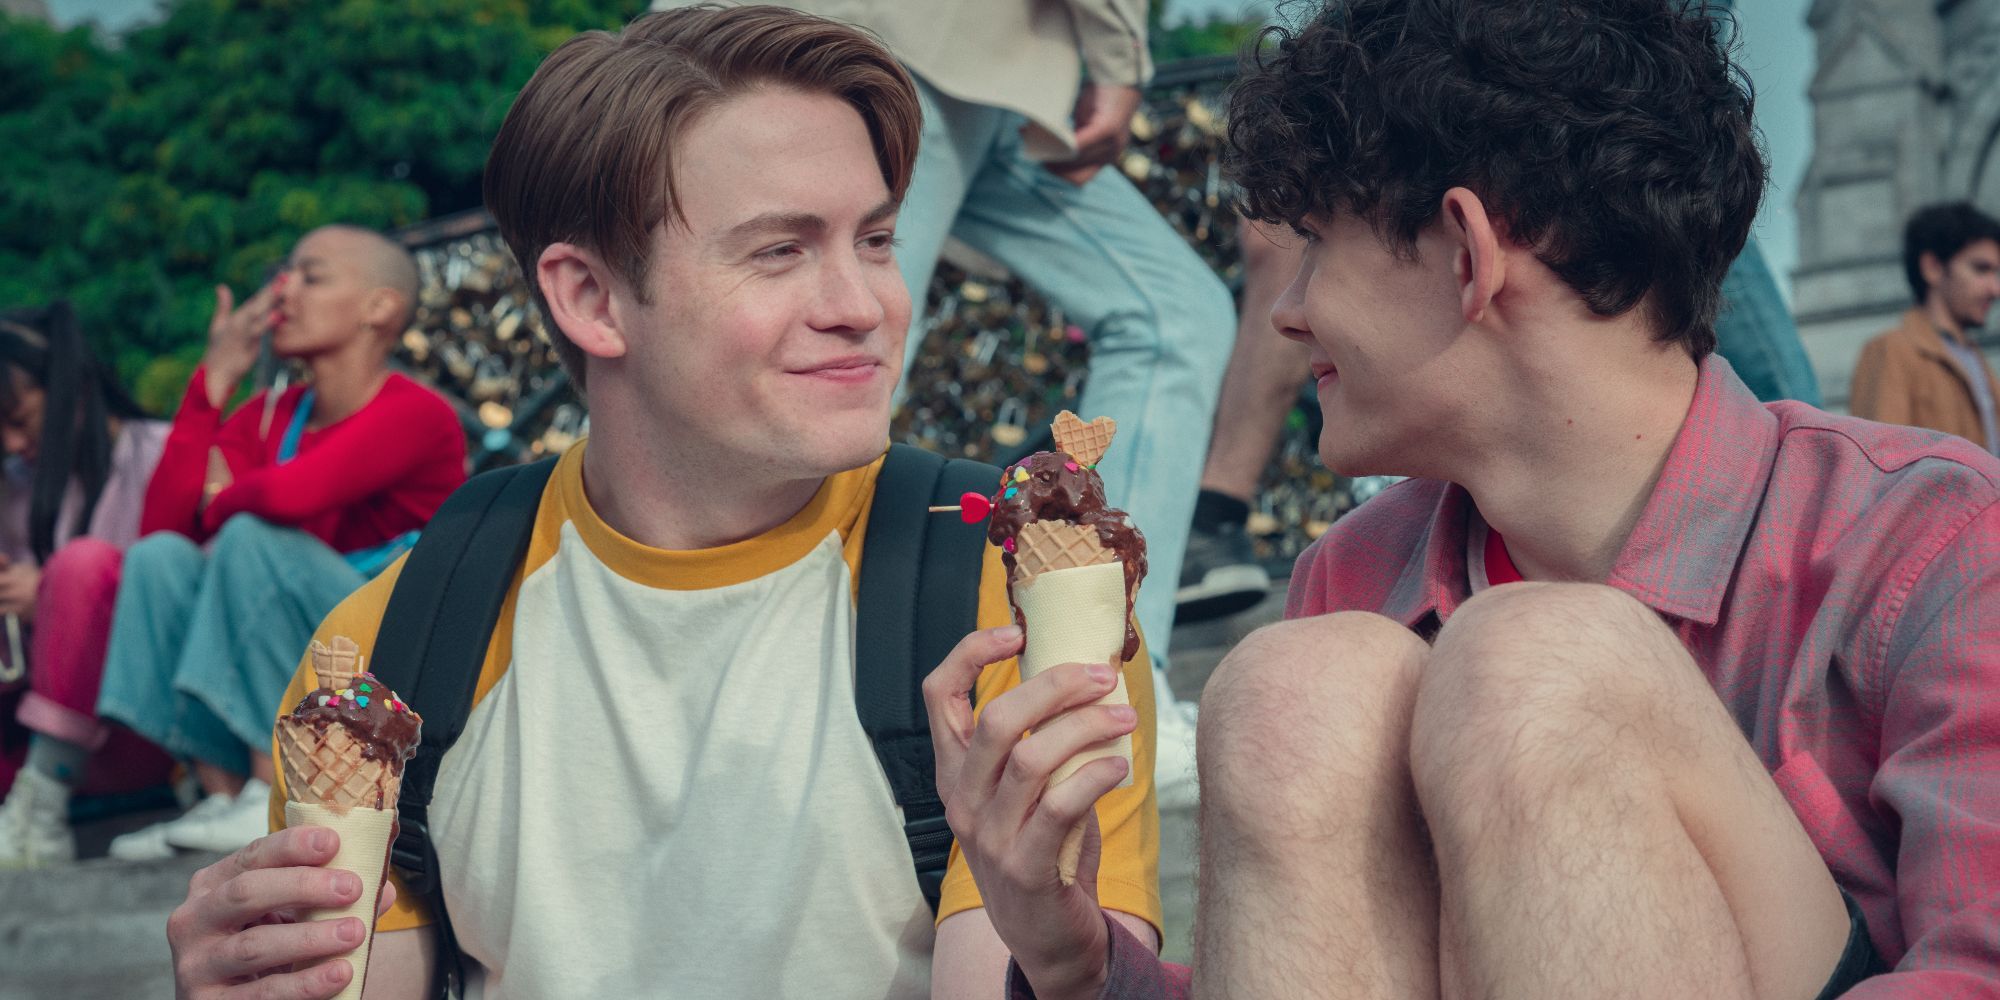 Kit Connor as Nick smiles at Joe Locke as Charlie as they eat ice cream in Heartstopper Season 2